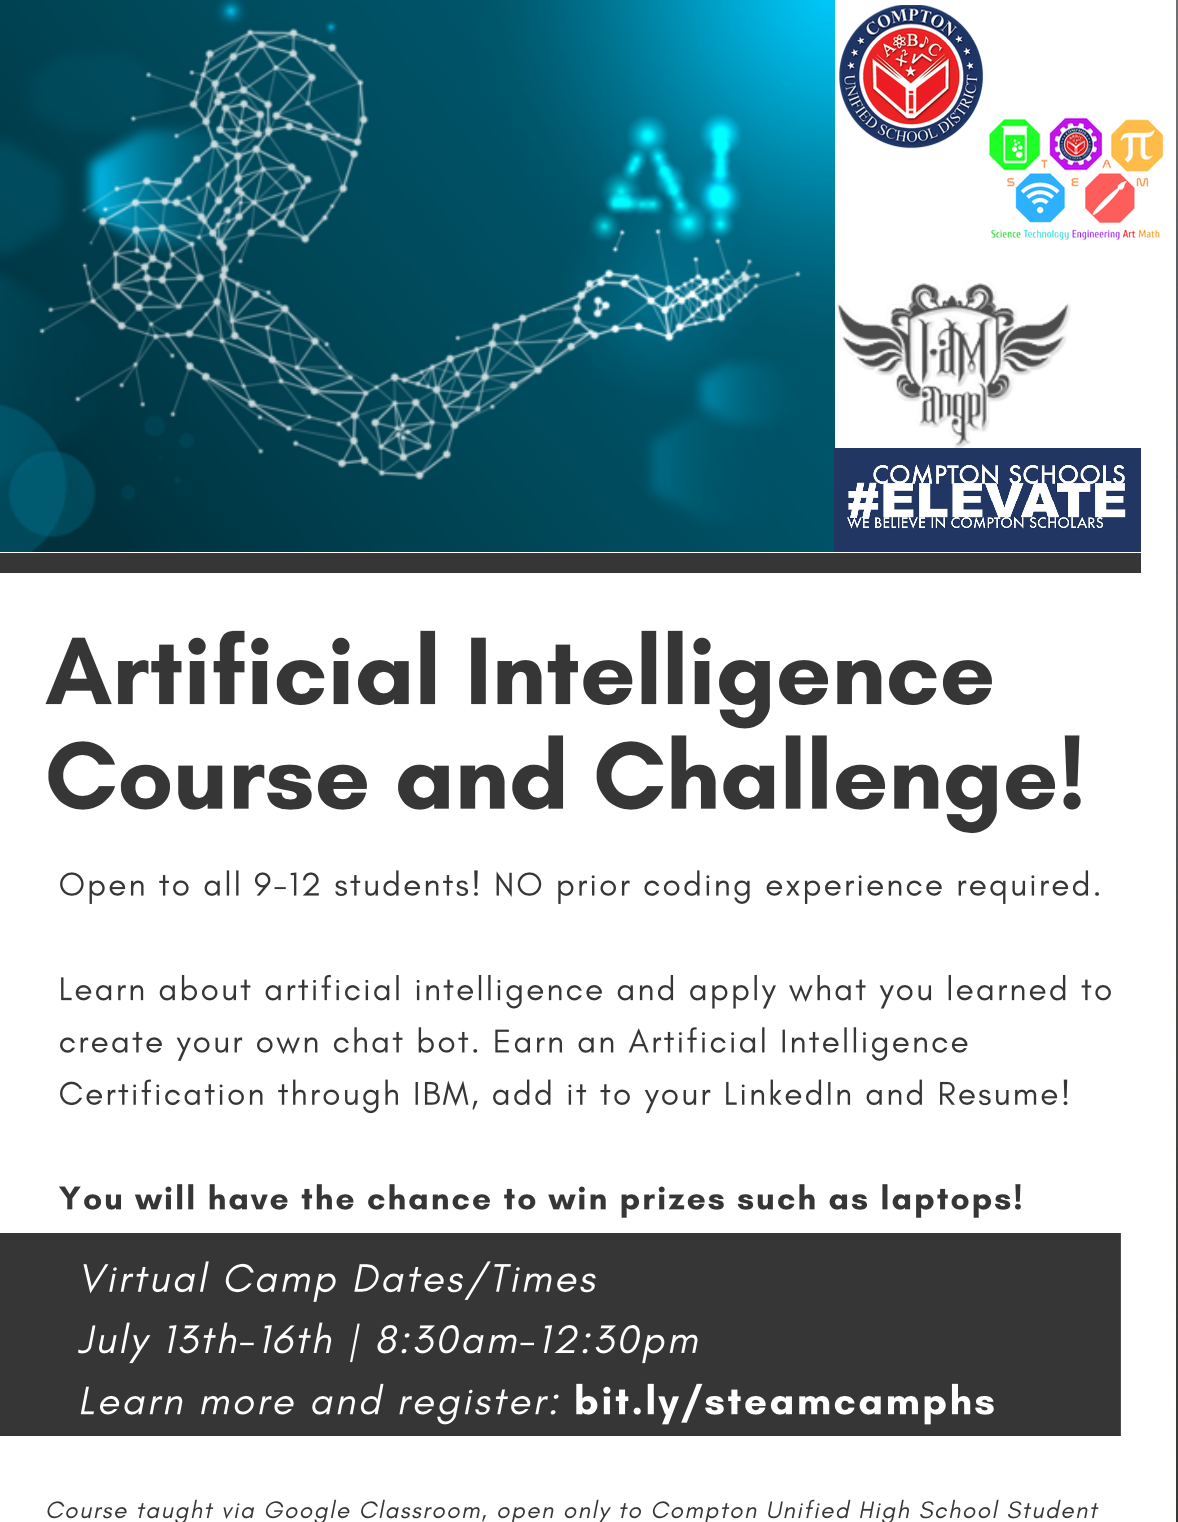 Artificial Intelligence Course and Challenge Flyer Image